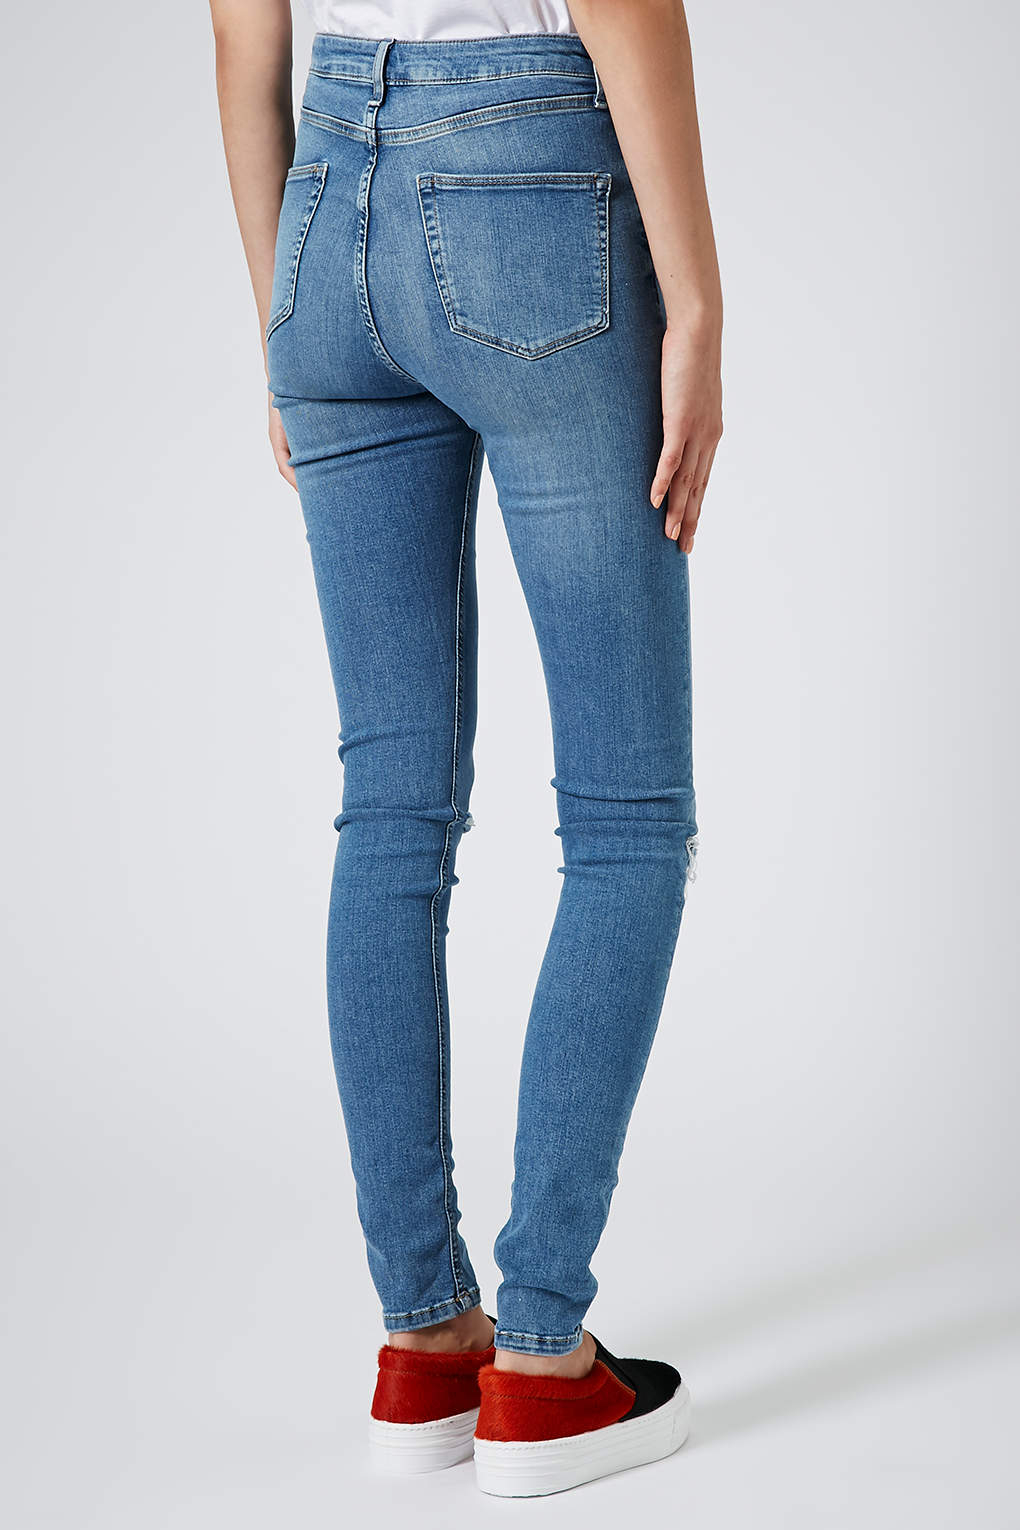 TOPSHOP Tall Moto Stone Wash Jamie Jeans in Mid Stone (Blue) - Lyst